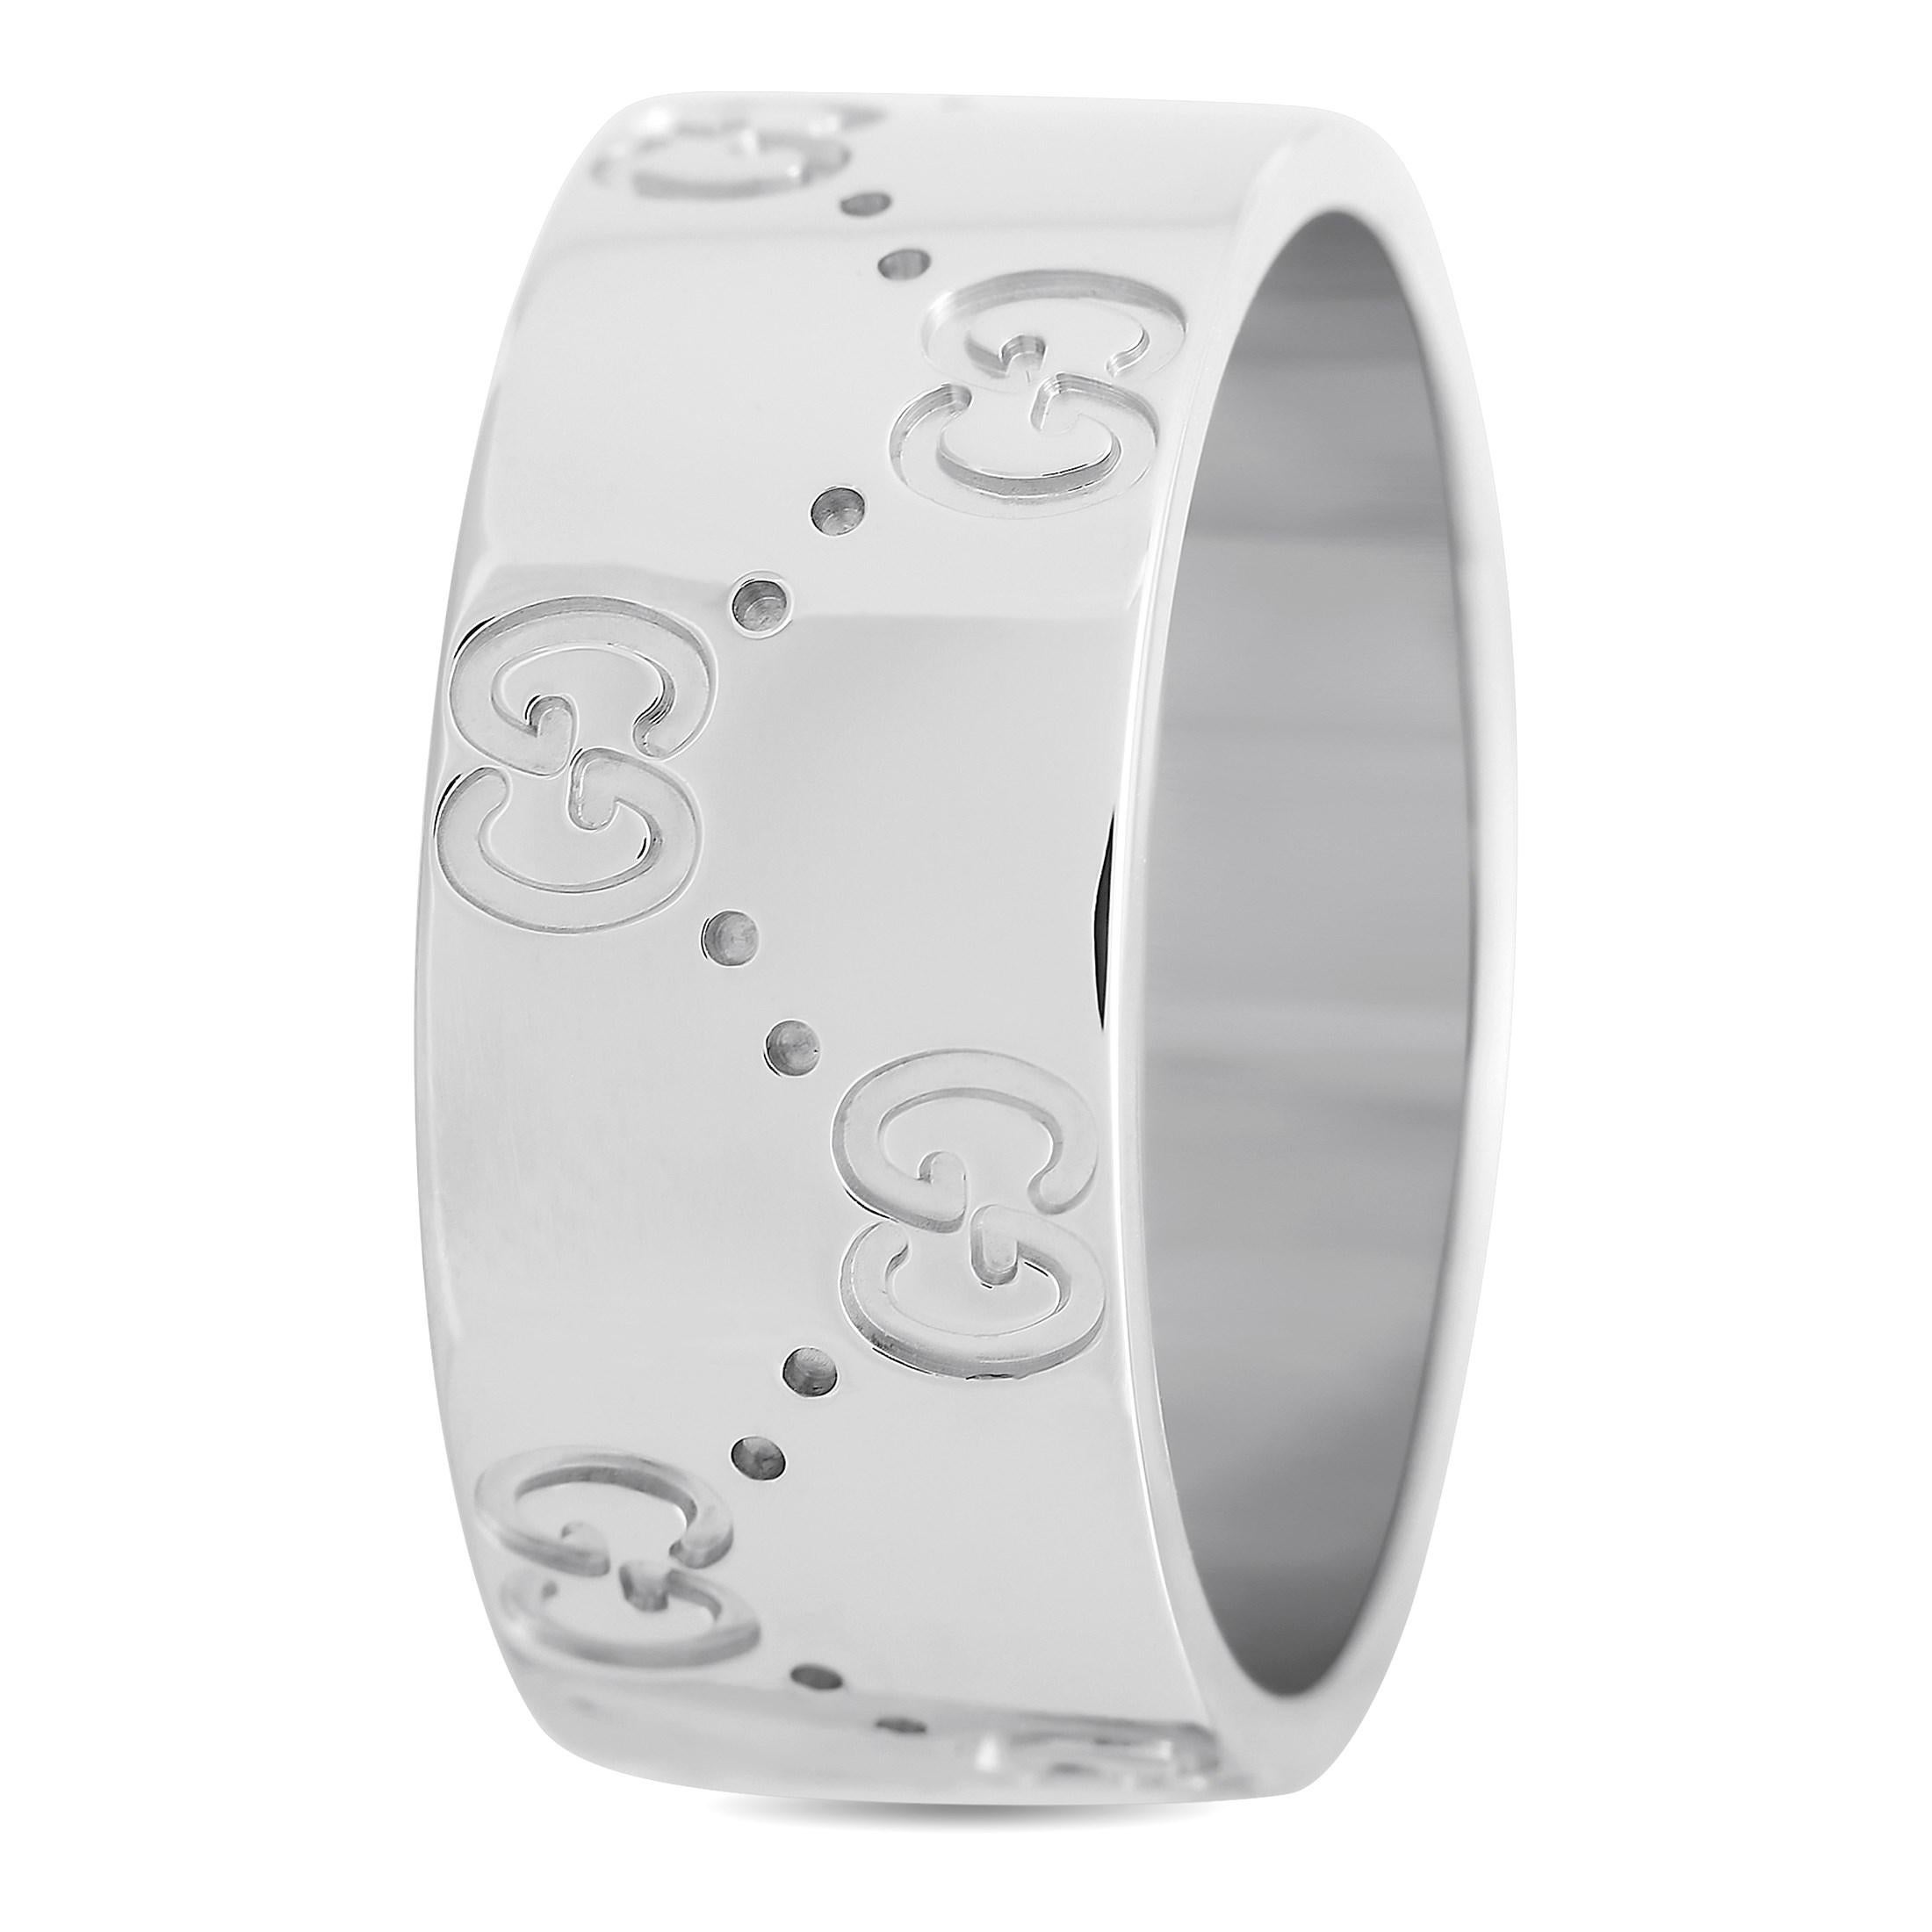 You could never go wrong with an icon so add this Gucci piece now to your jewelry collection. The 7mm band comes fashioned in 18K white gold and is engraved with the brand's double G logo. This ladies' ring comes with a sleek but textured finish